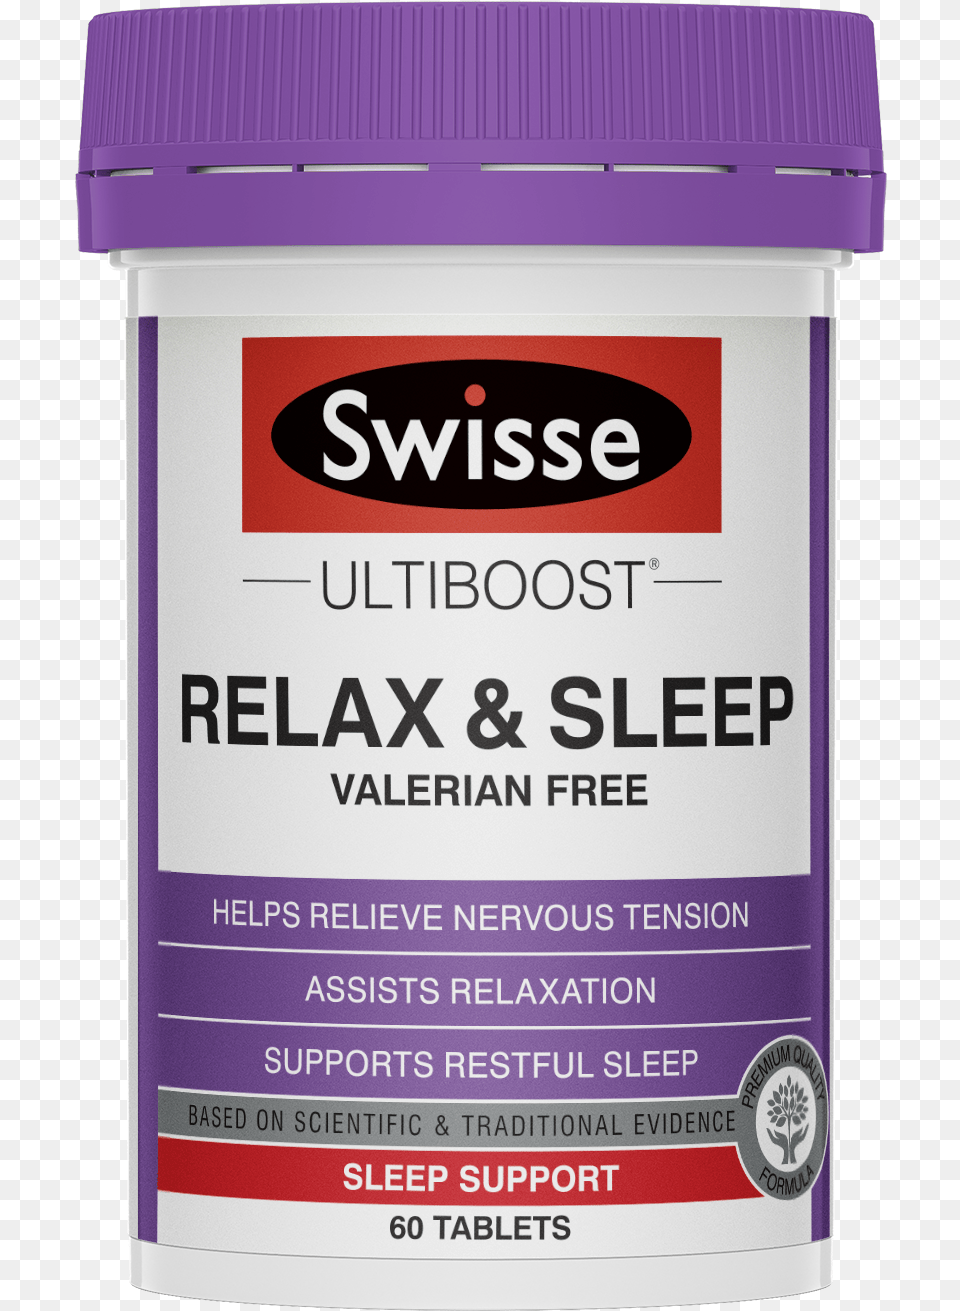 Swisse Sleep And Relax, Cosmetics, Mailbox Png Image